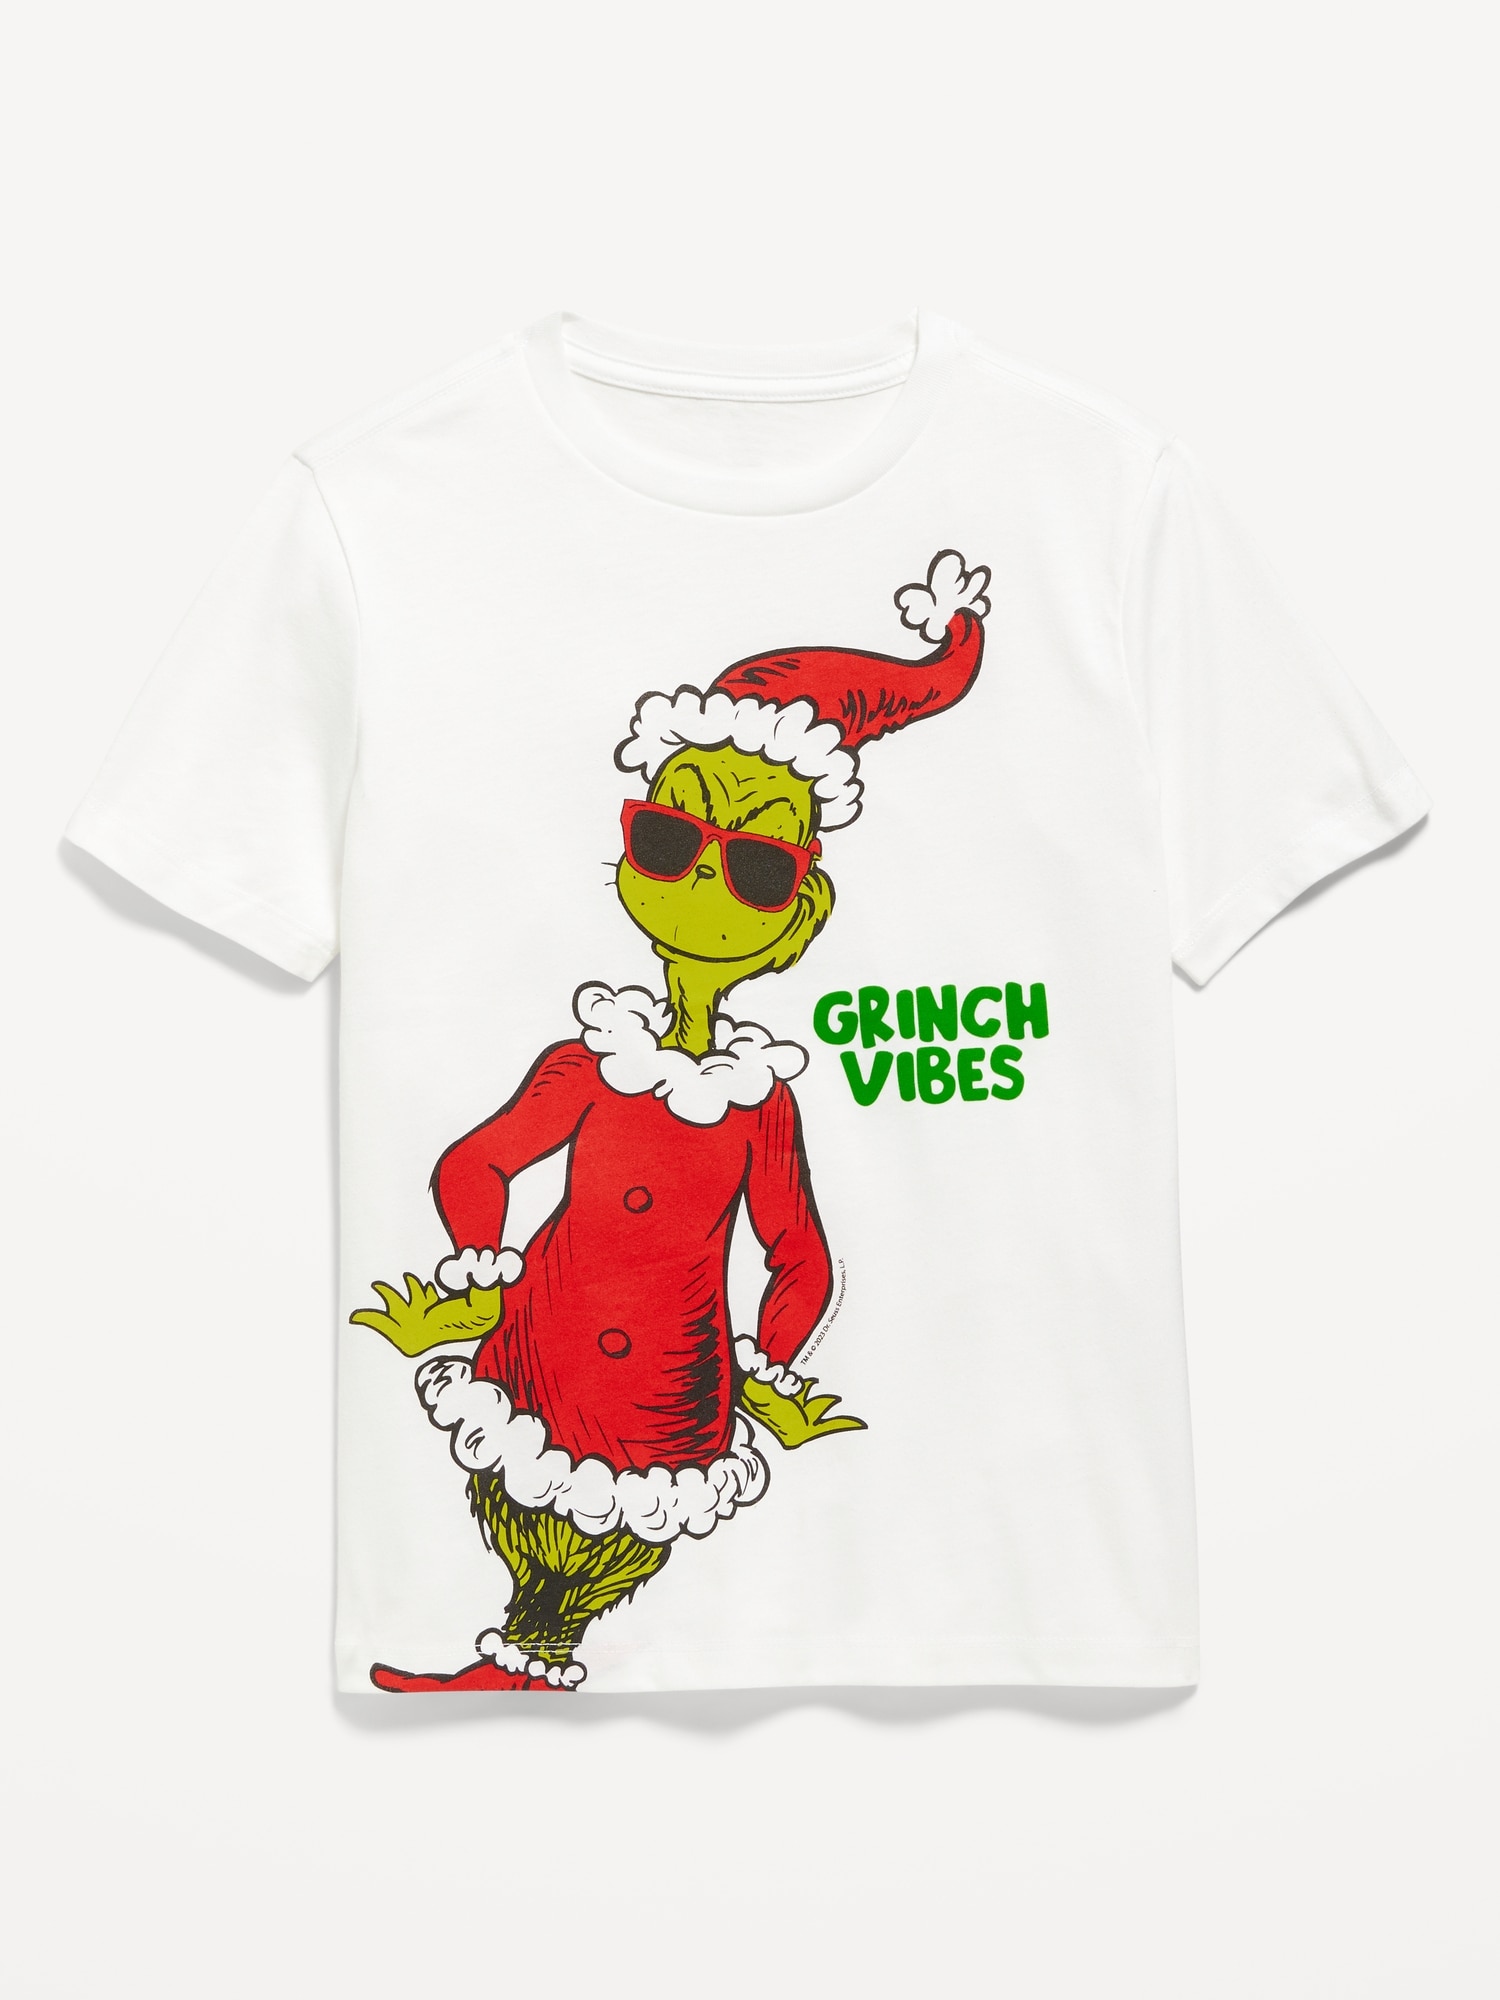 How The Grinch Stole Christmas™ Gender-Neutral Graphic T-Shirt for Kids